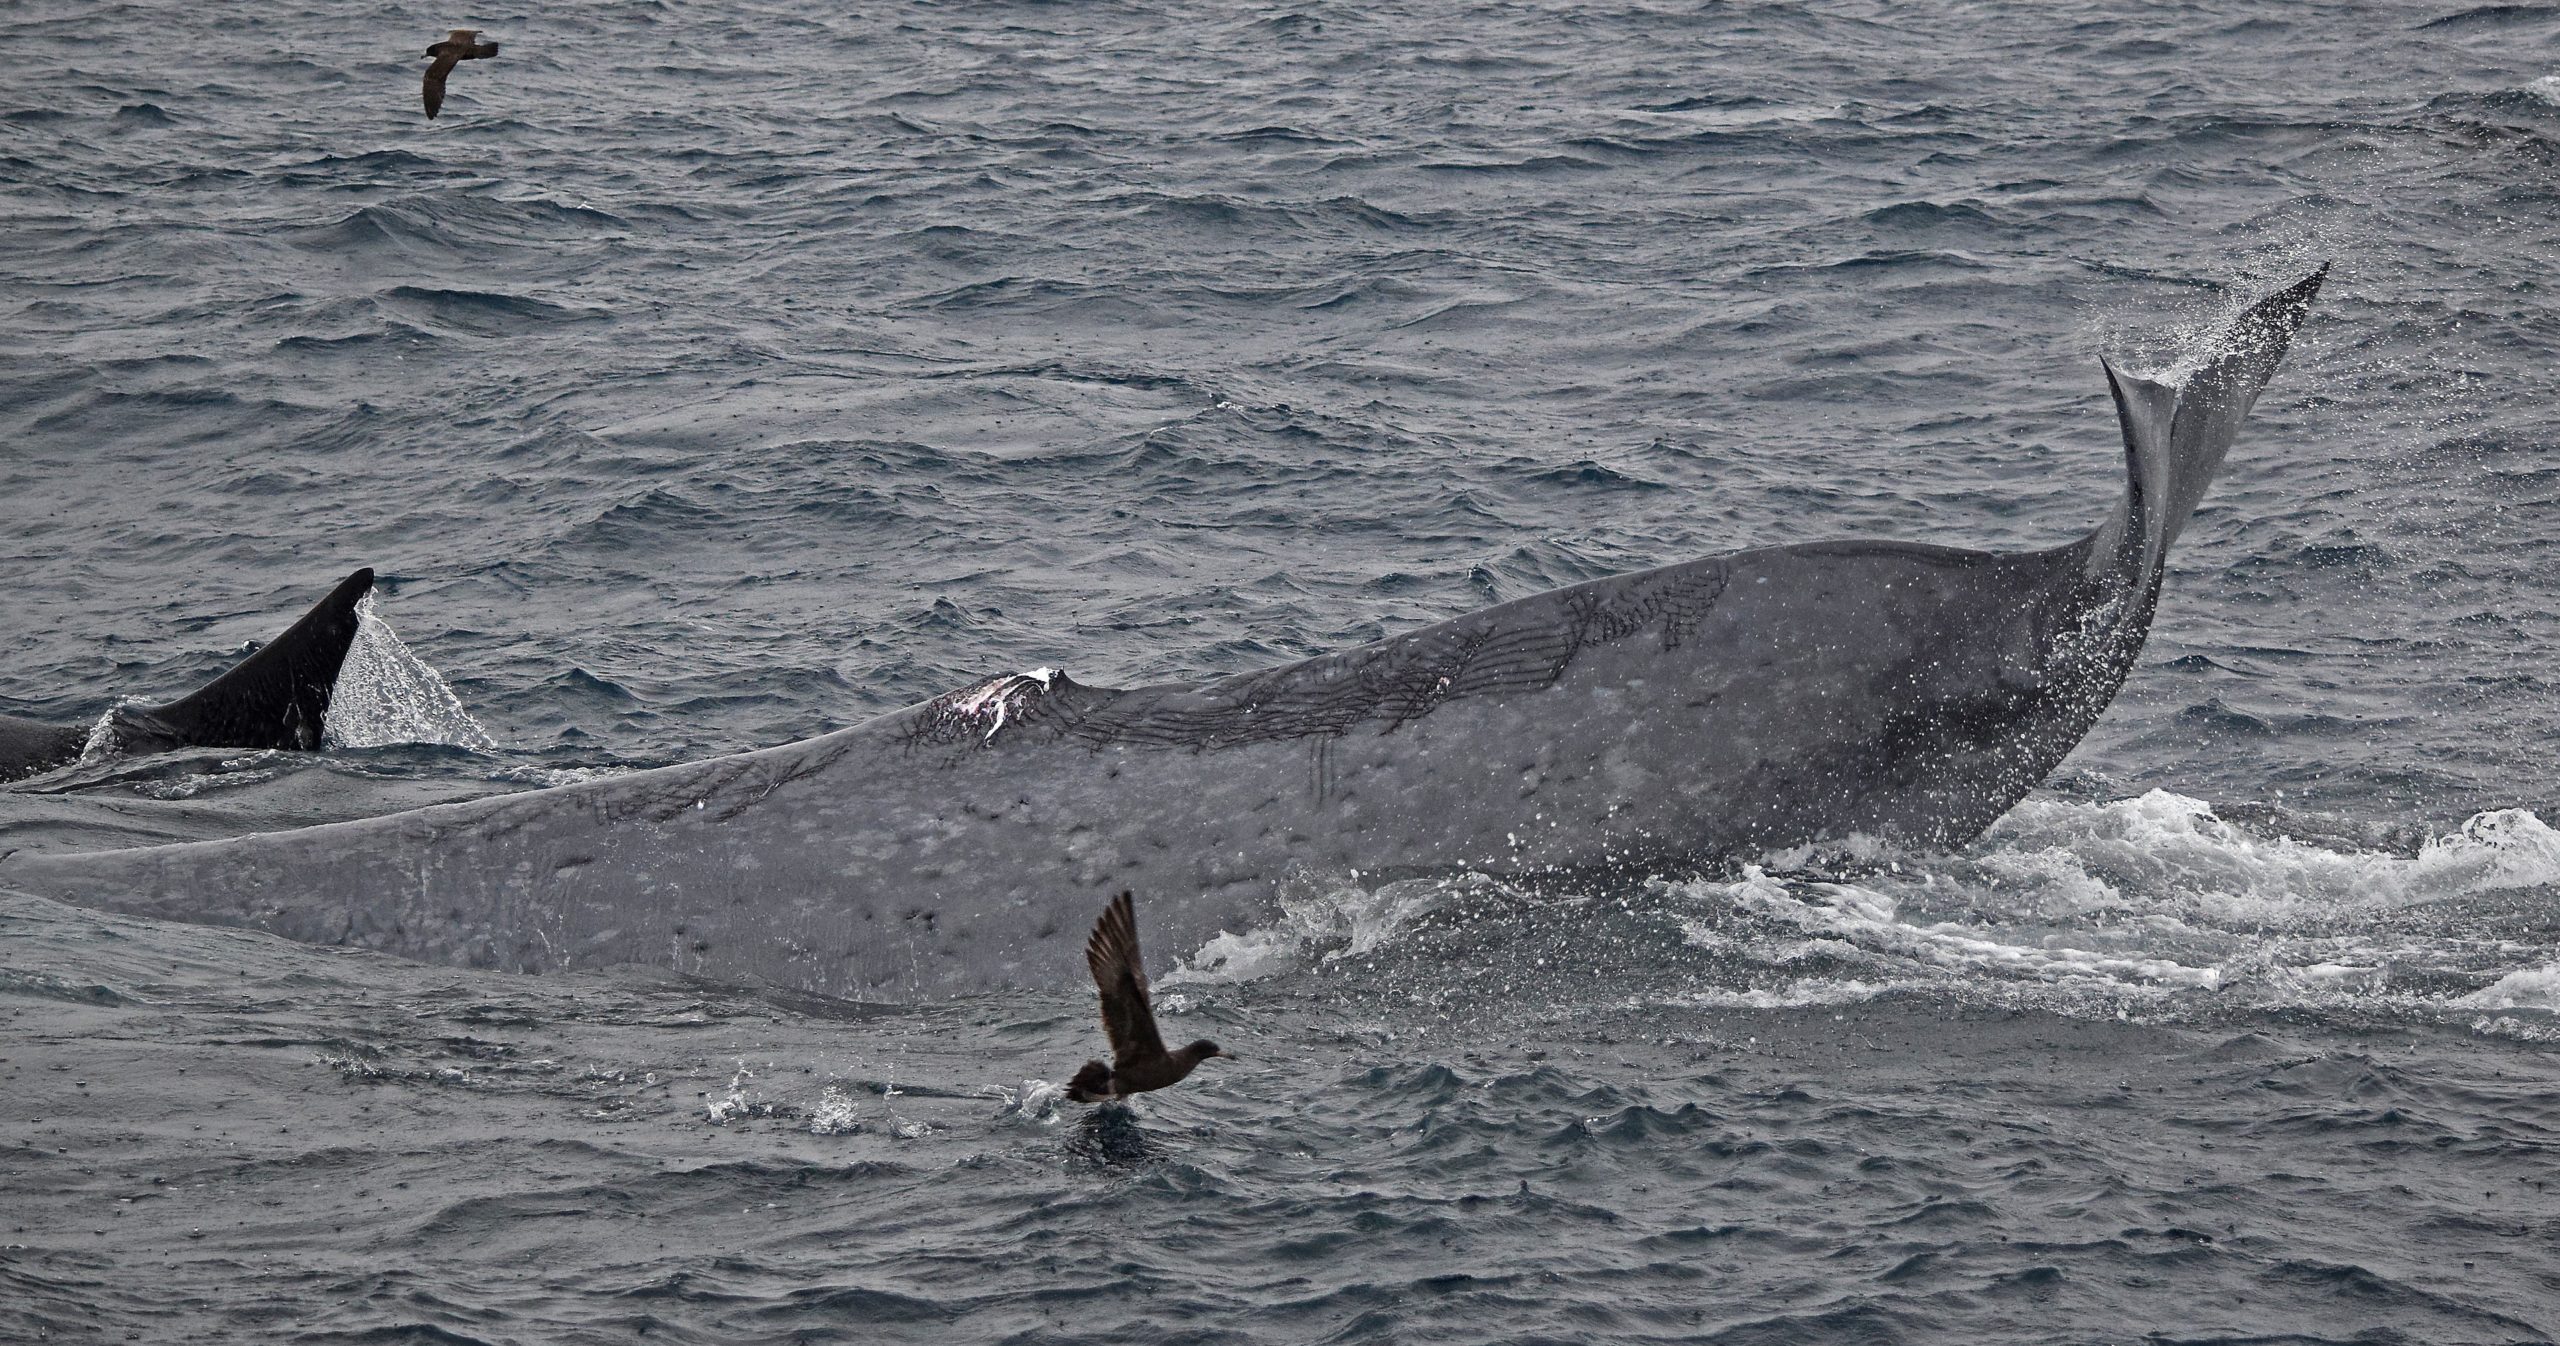 The orcas severed the adult blue whale's dorsal fin.  (Photo: John Totterdell/CETREC WA)